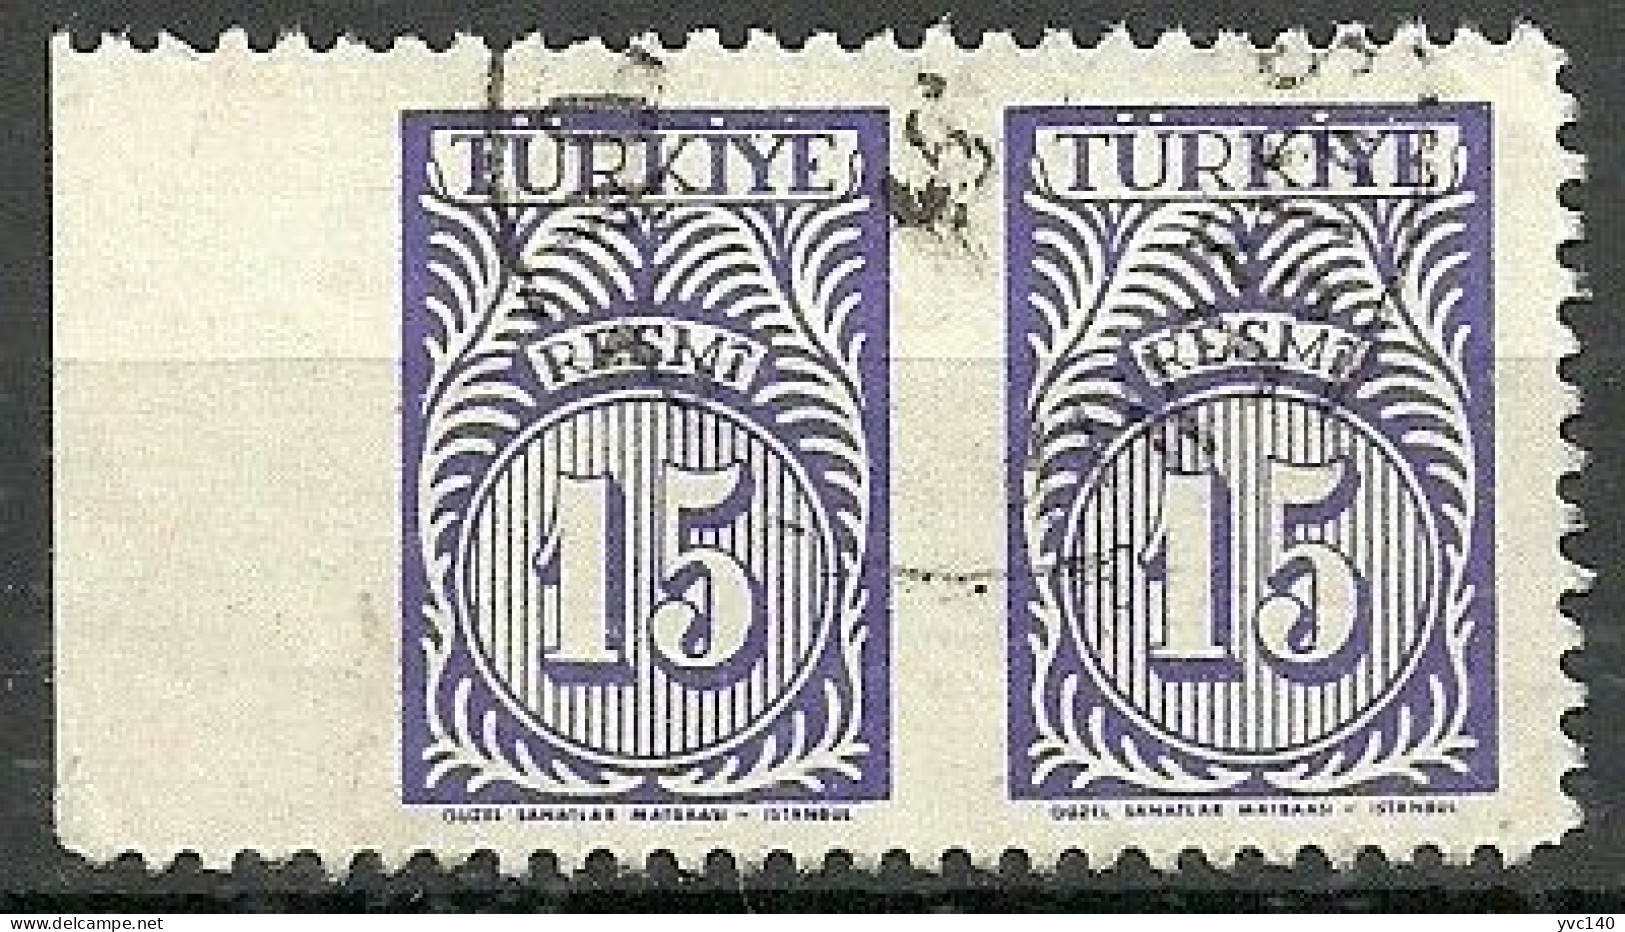 Turkey; 1957 Official Stamp 15 K. ERROR "Partially Imperf." - Timbres De Service